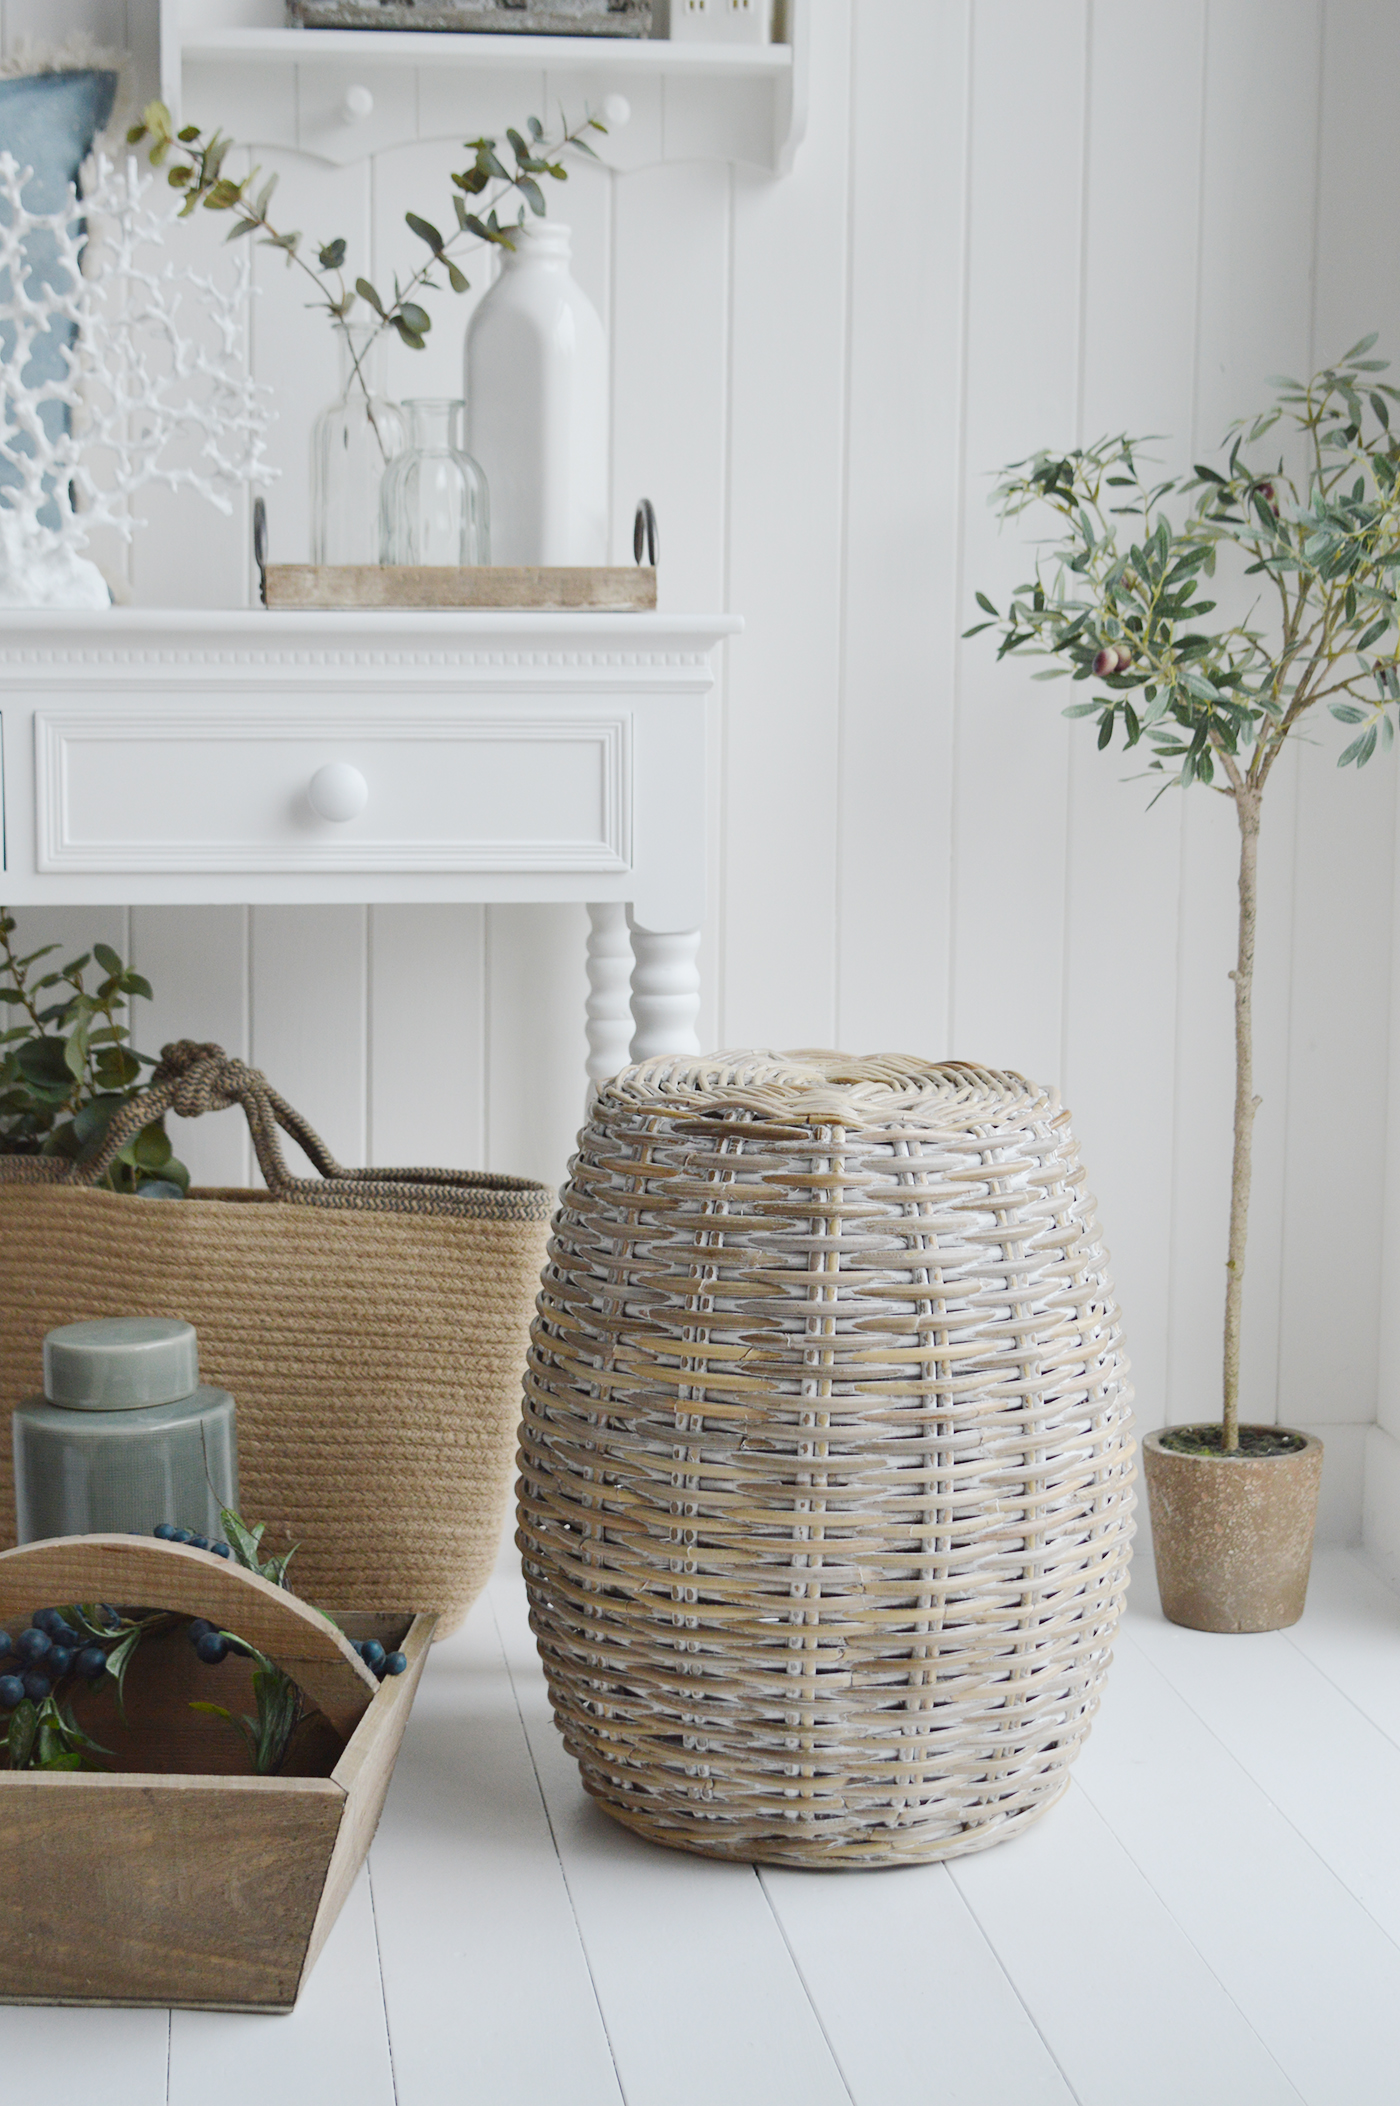 Oxford white wash willow seat or stool  - Ideal to add warmth with natural material in a coastal or New England living room interior decor from The White LIghthouse Furniture. Bathroom, Living Room, Bedroom and Hallway Furniture for beautiful homes